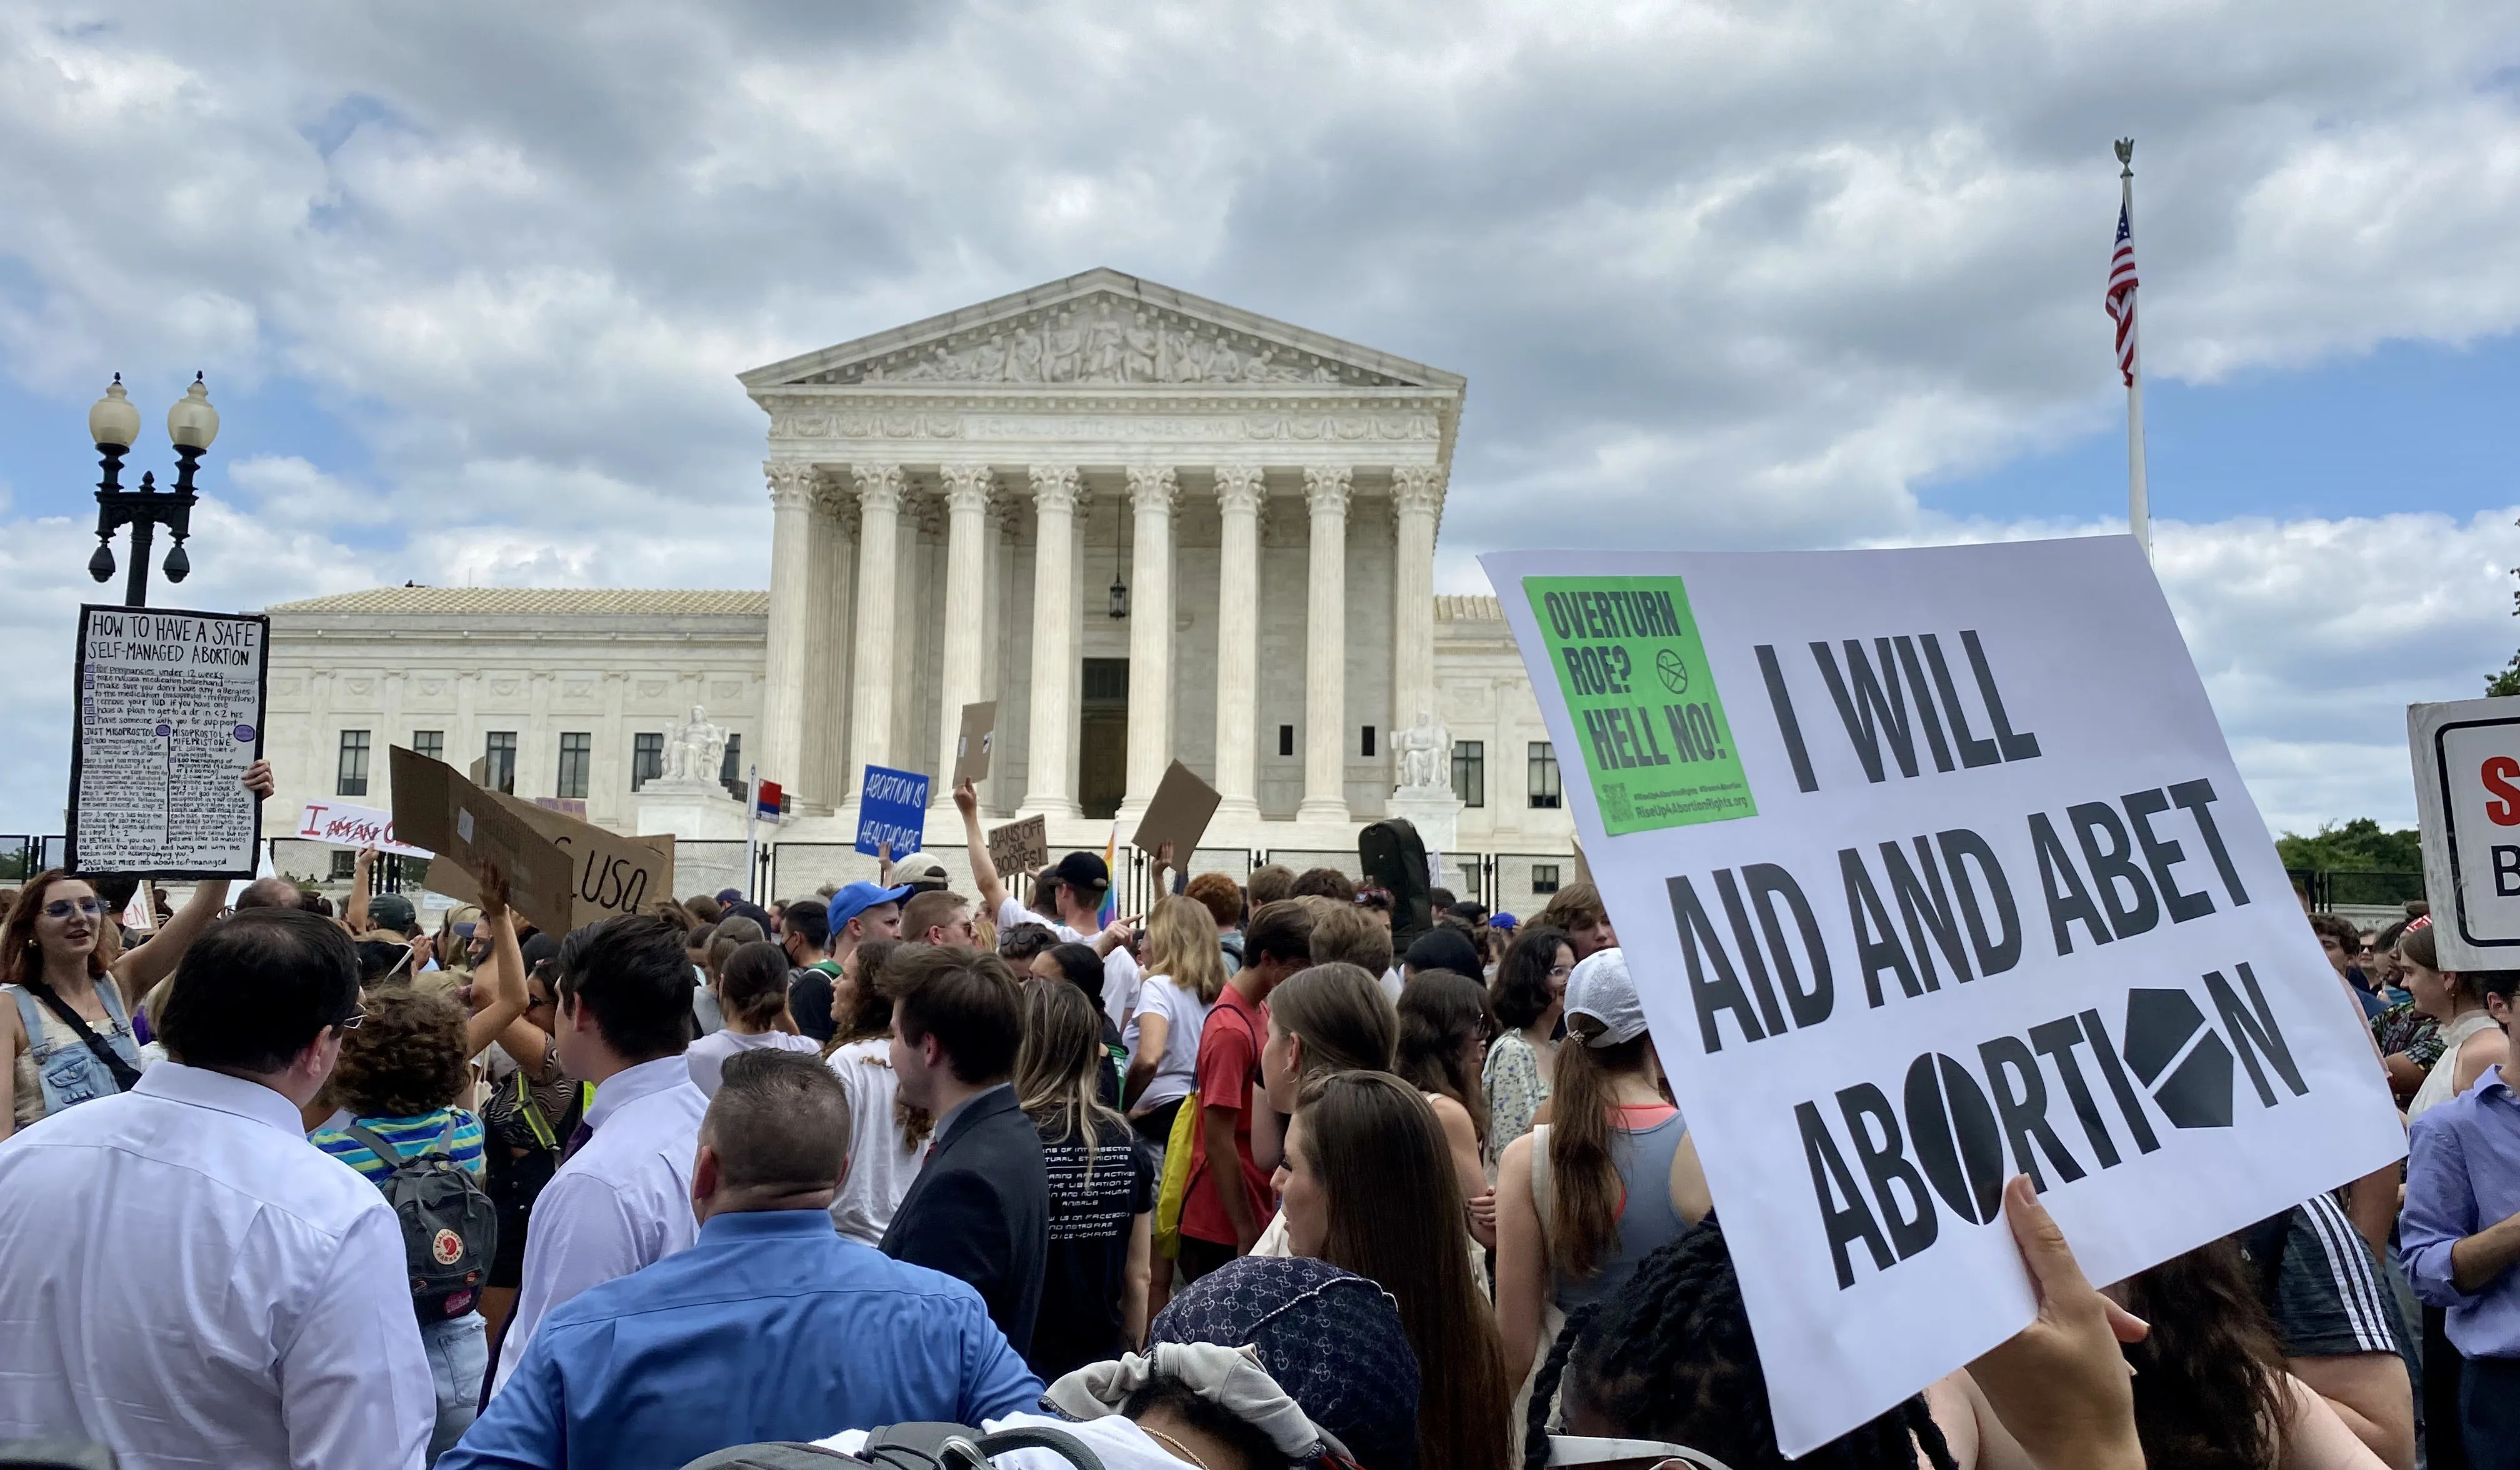 The scene outside the U.S. Supreme Court in Washington, D.C., after the court released its decision in the Dobbs case, June 24, 2022.?w=200&h=150